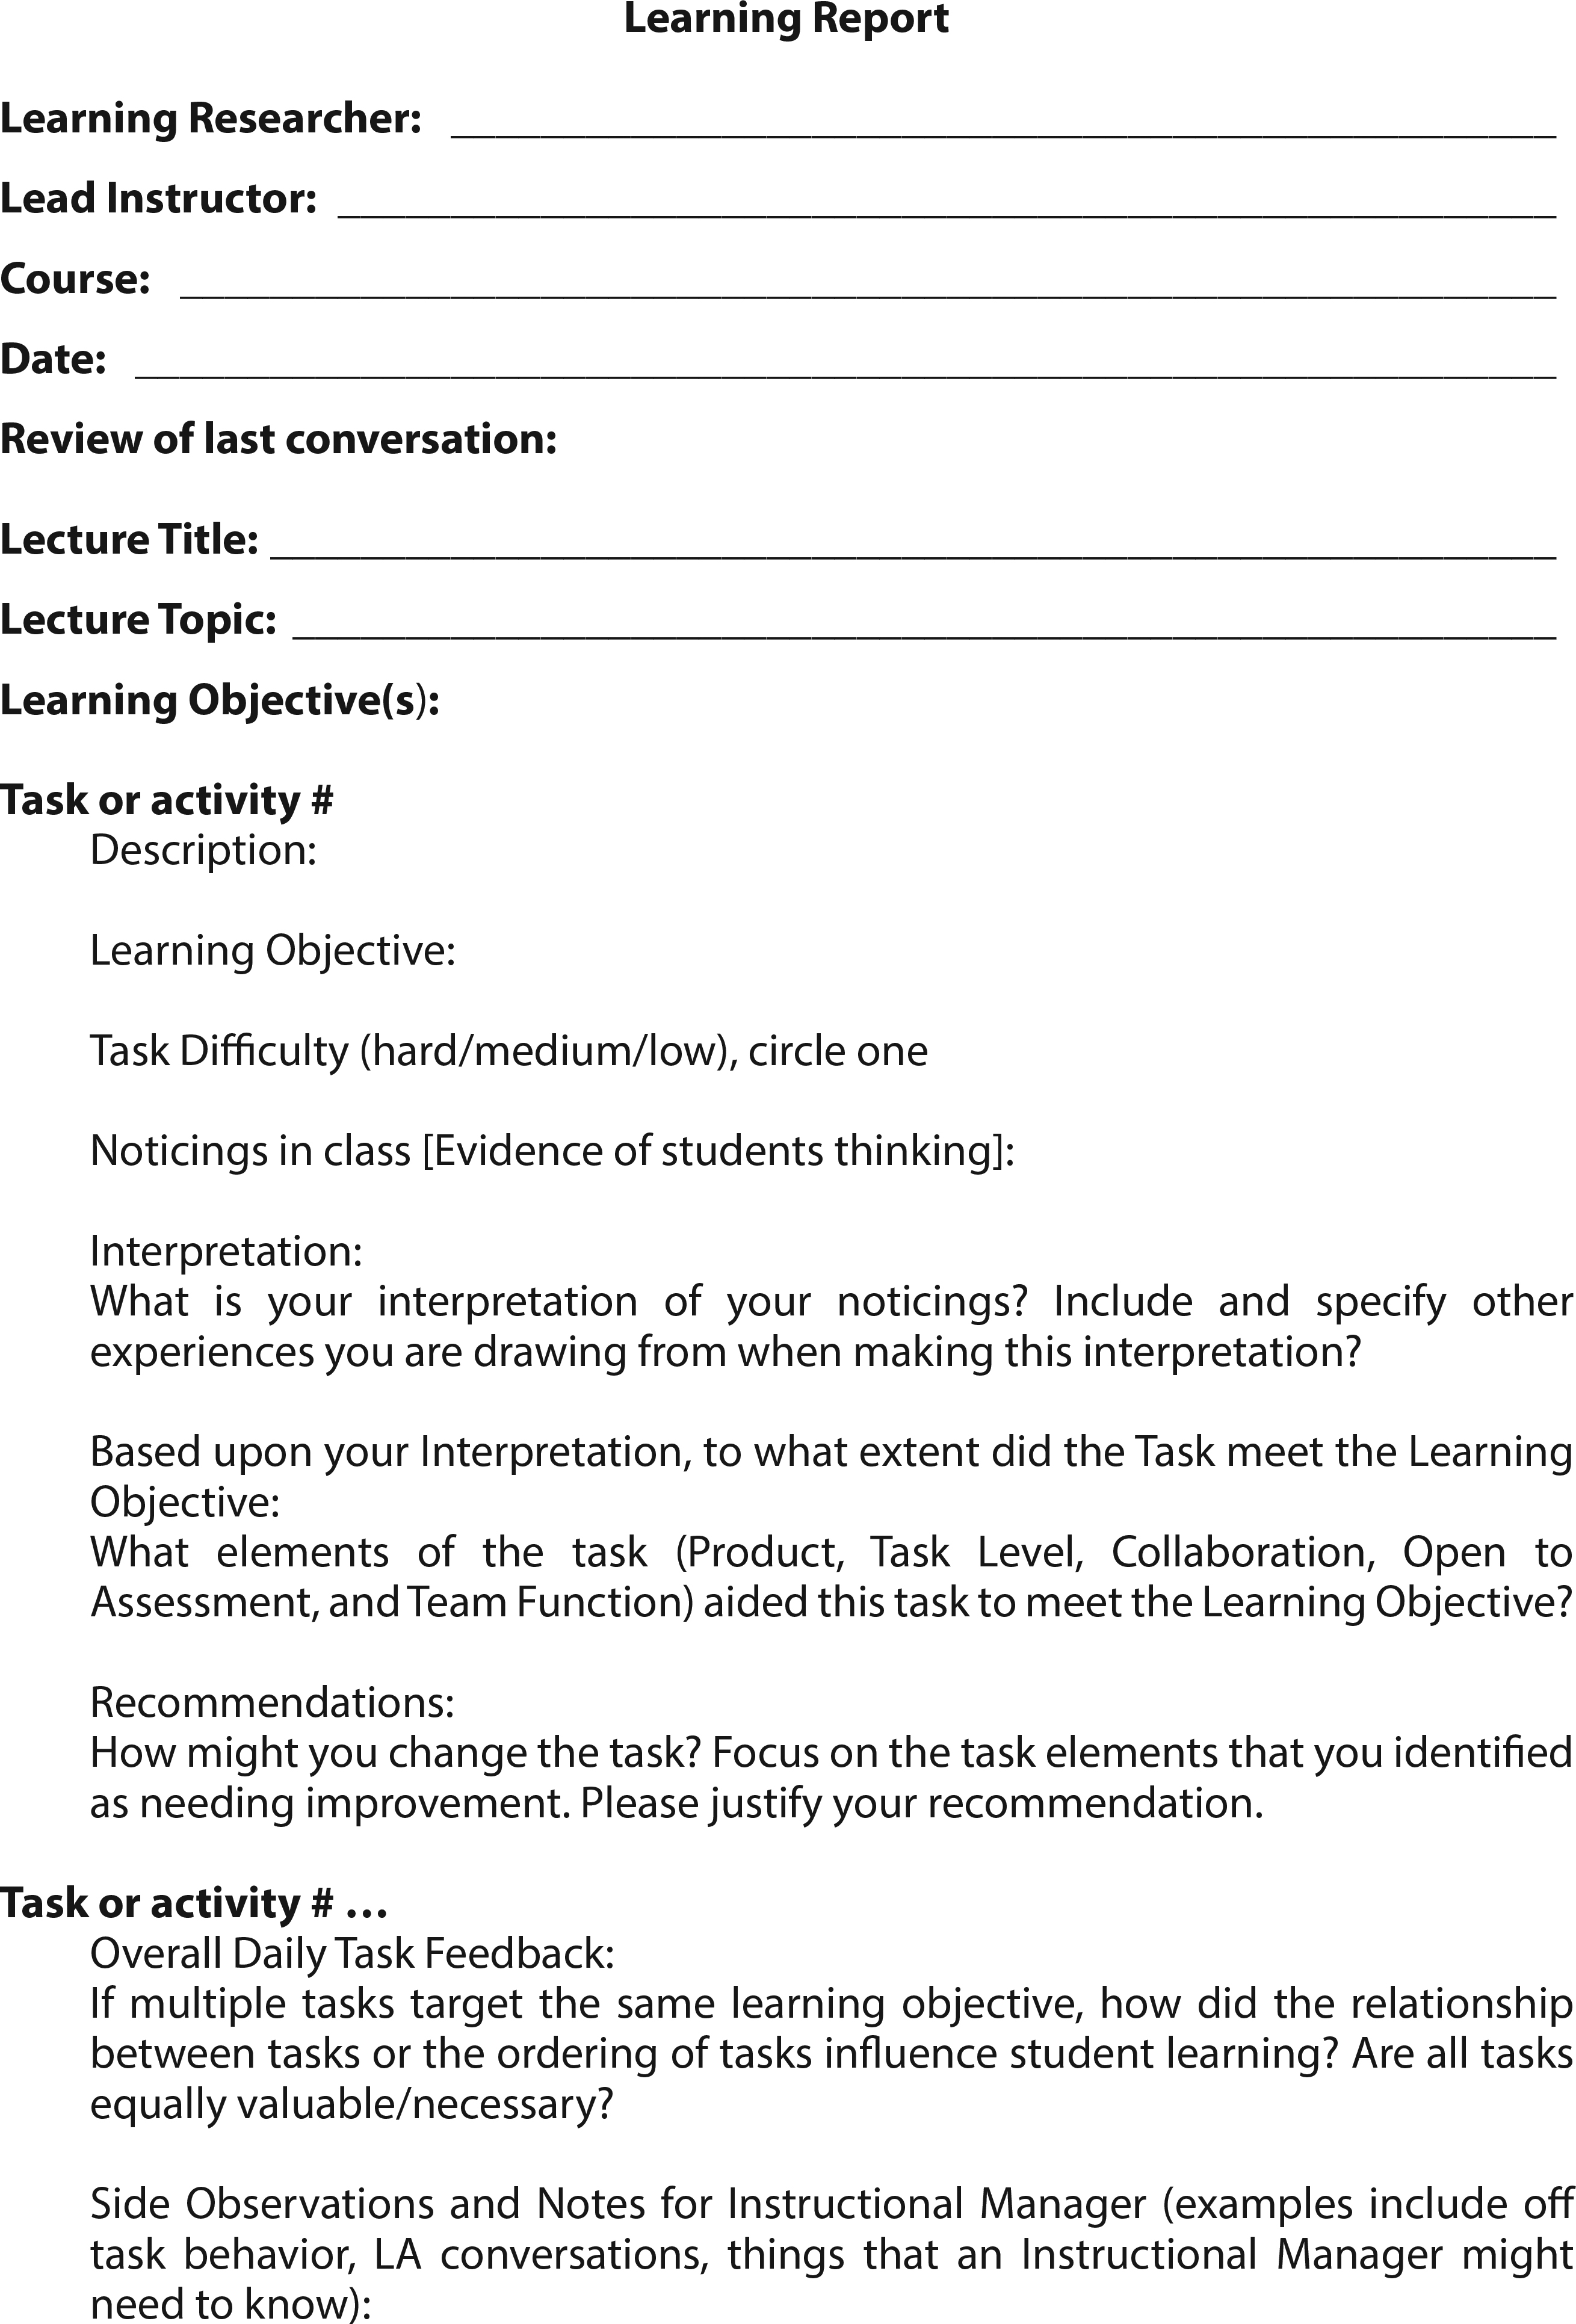 Learning researcher (LR) report template.